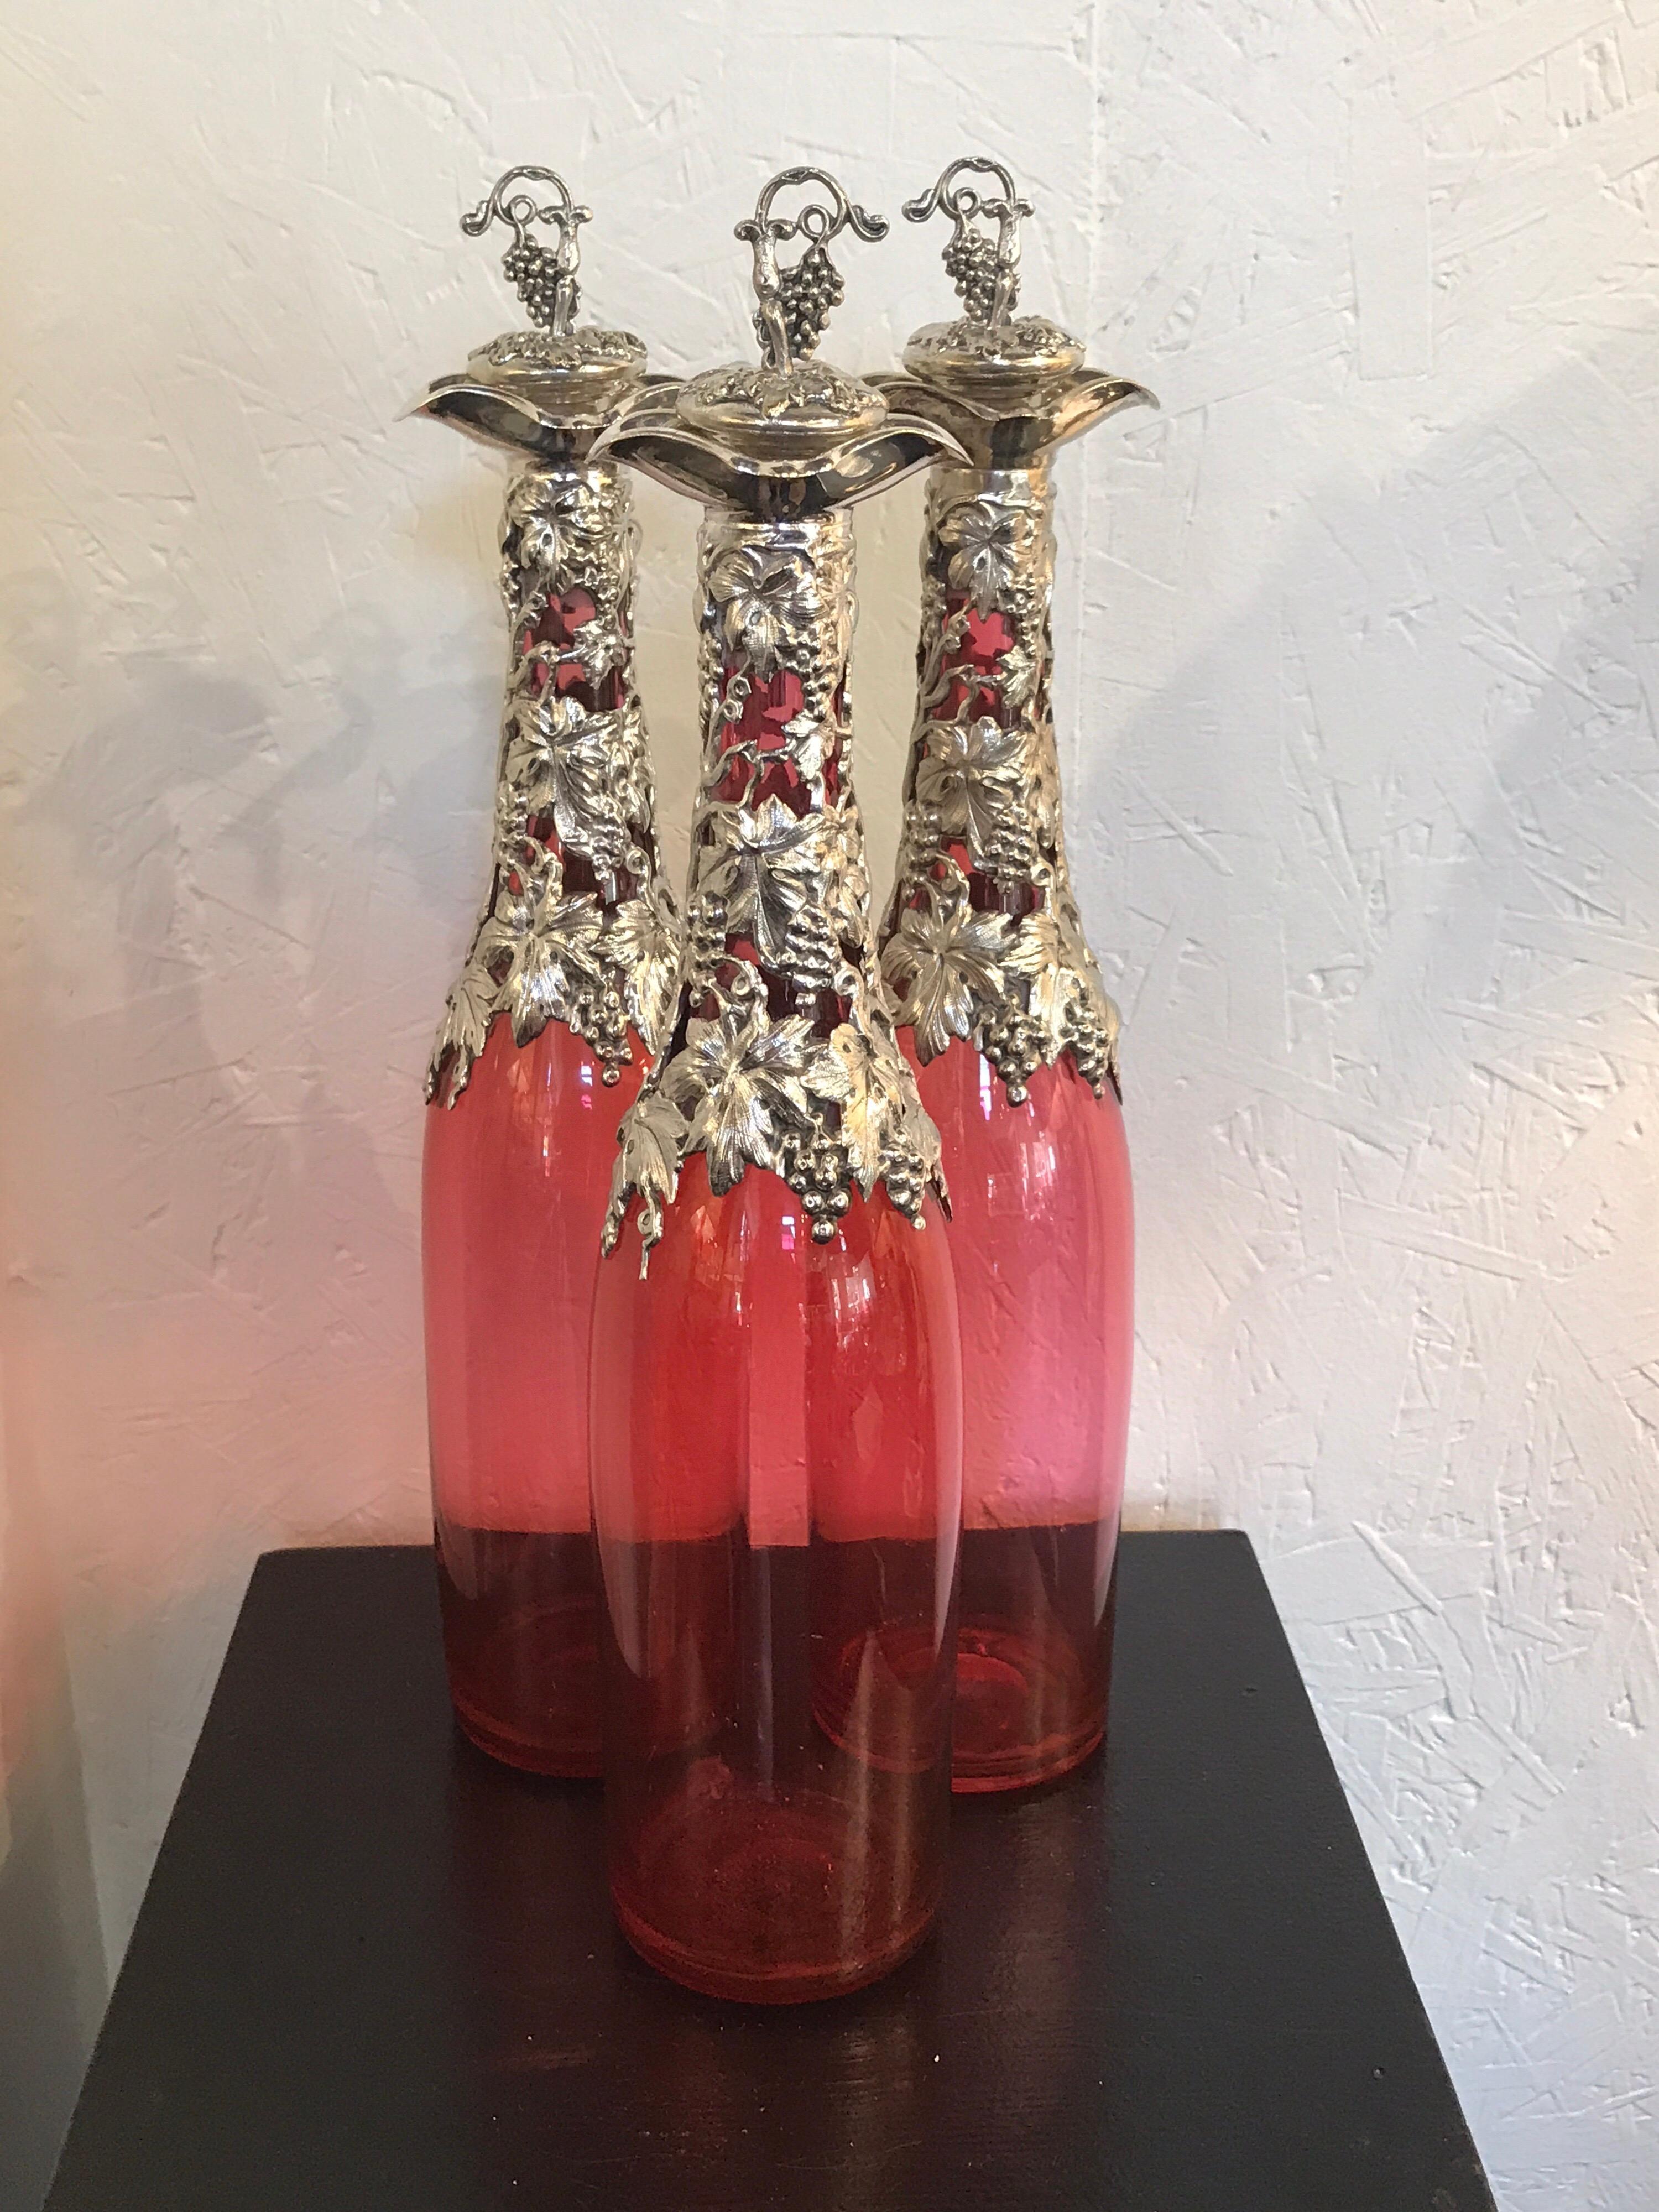 19th Century Stunning English Silver Plate and Cranberry Glass Three-Bottle Tauntless